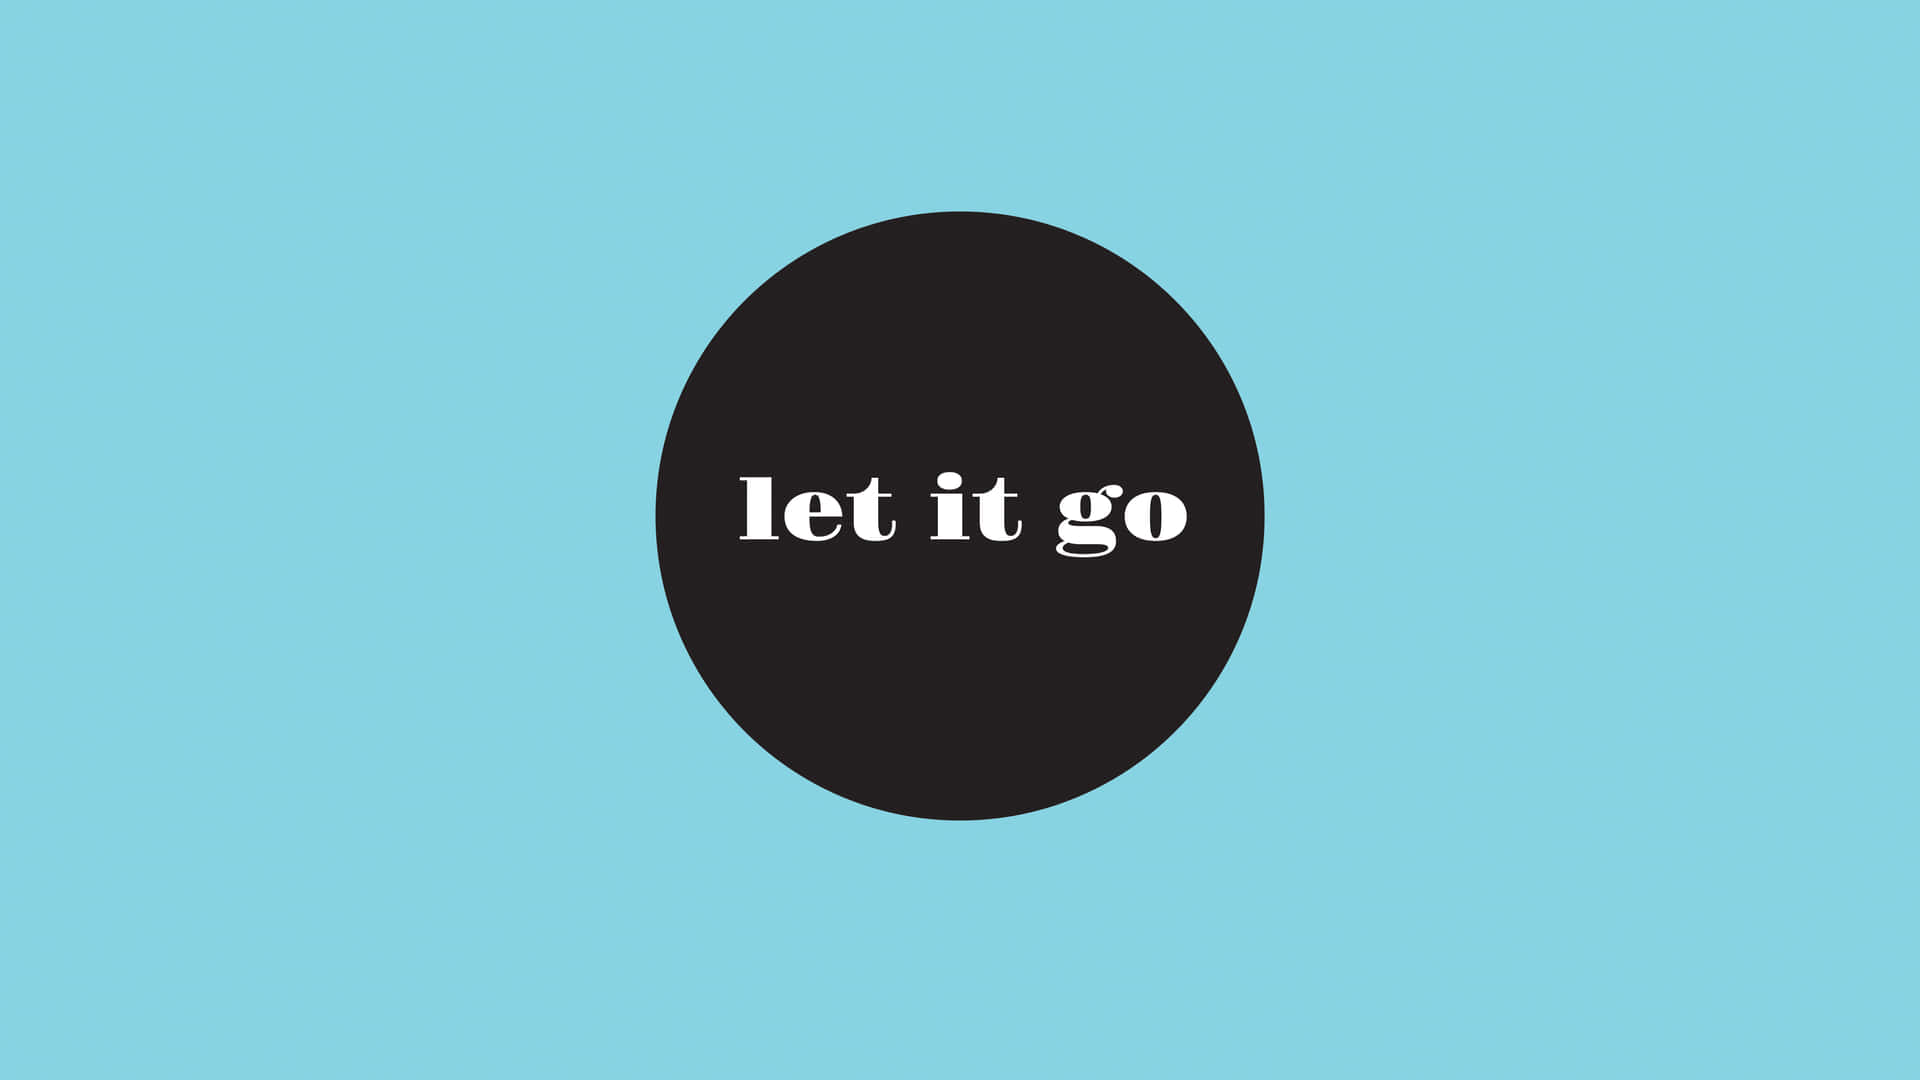 Lets go further. Обои Lets go. Мне 19 лет обои. Let it be обои черные. The Let it go circle.